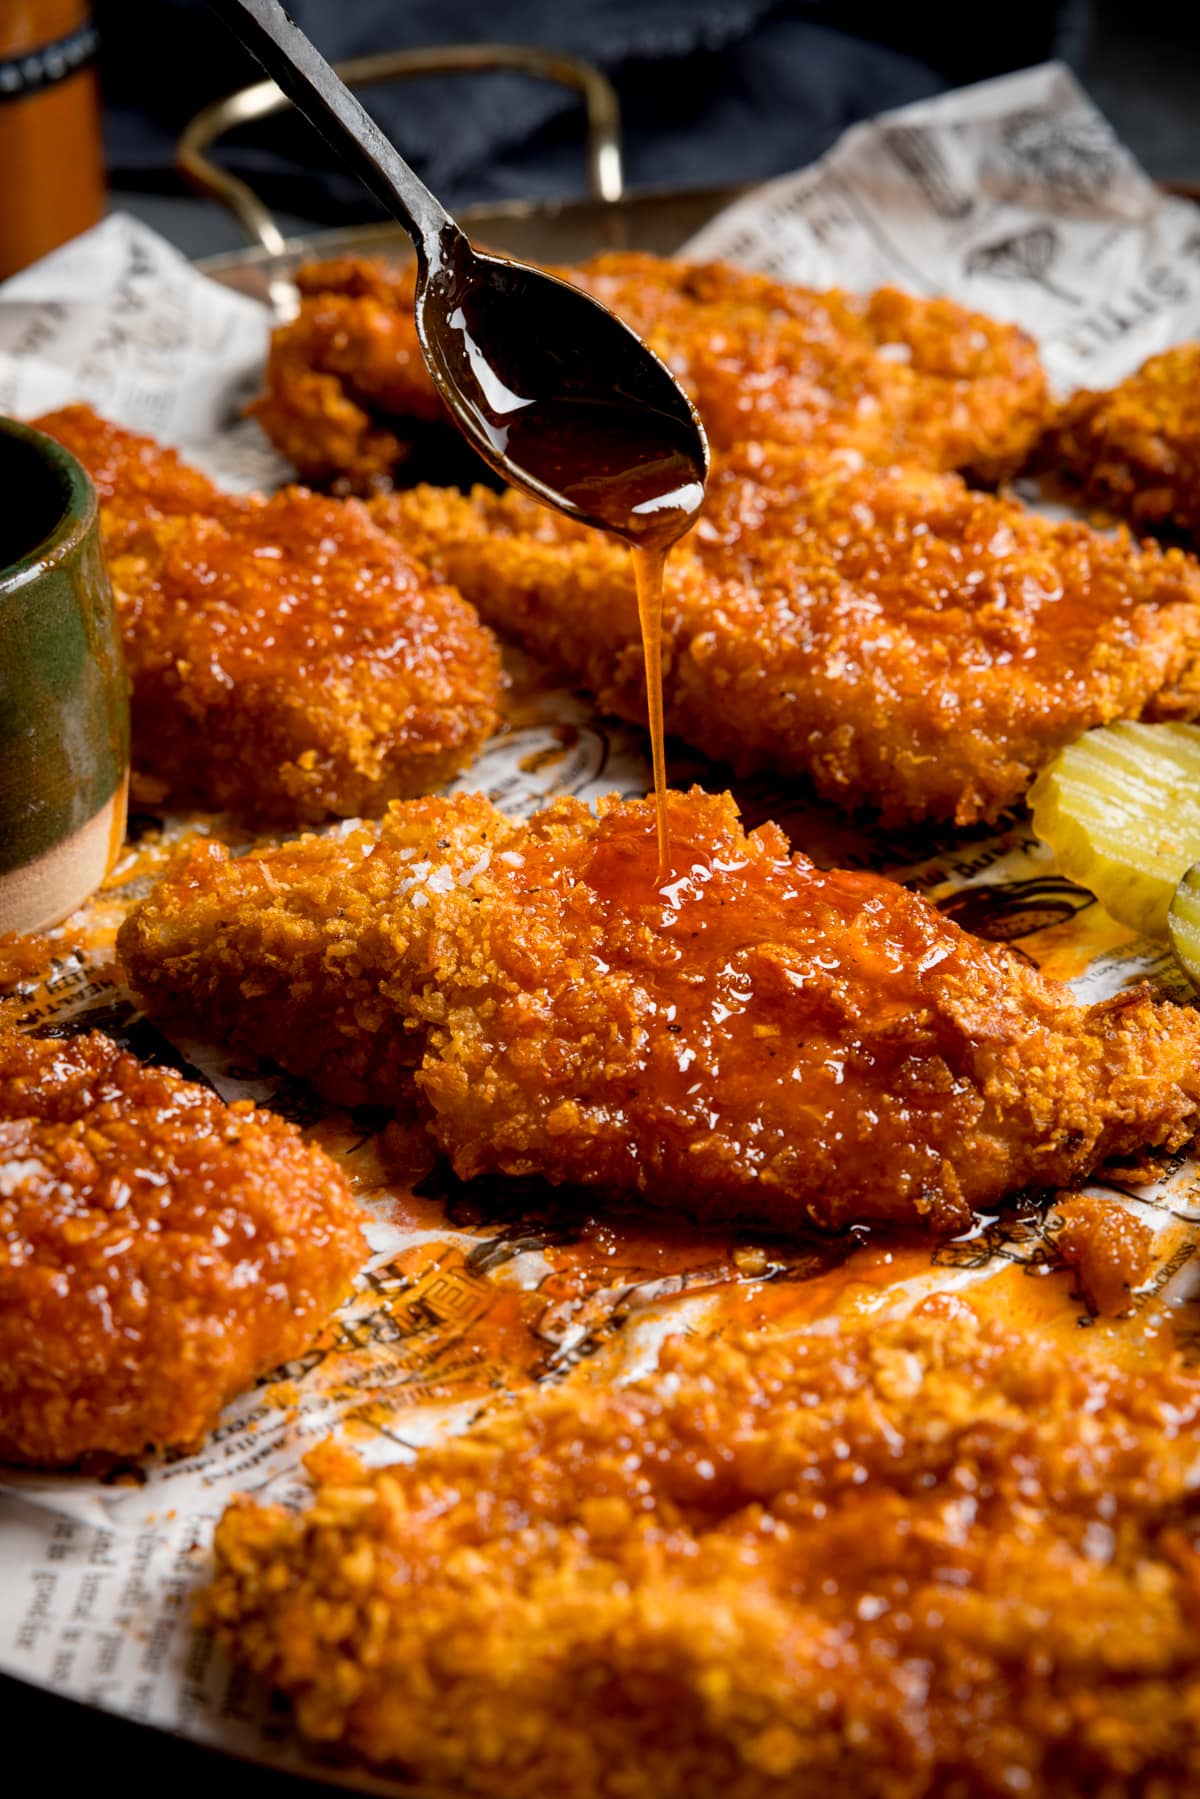 Crispy baked chicken breast fillets on a baking tray with sliced pickles. The chicken is being drizzled with hot honey sauce from a black spoon.